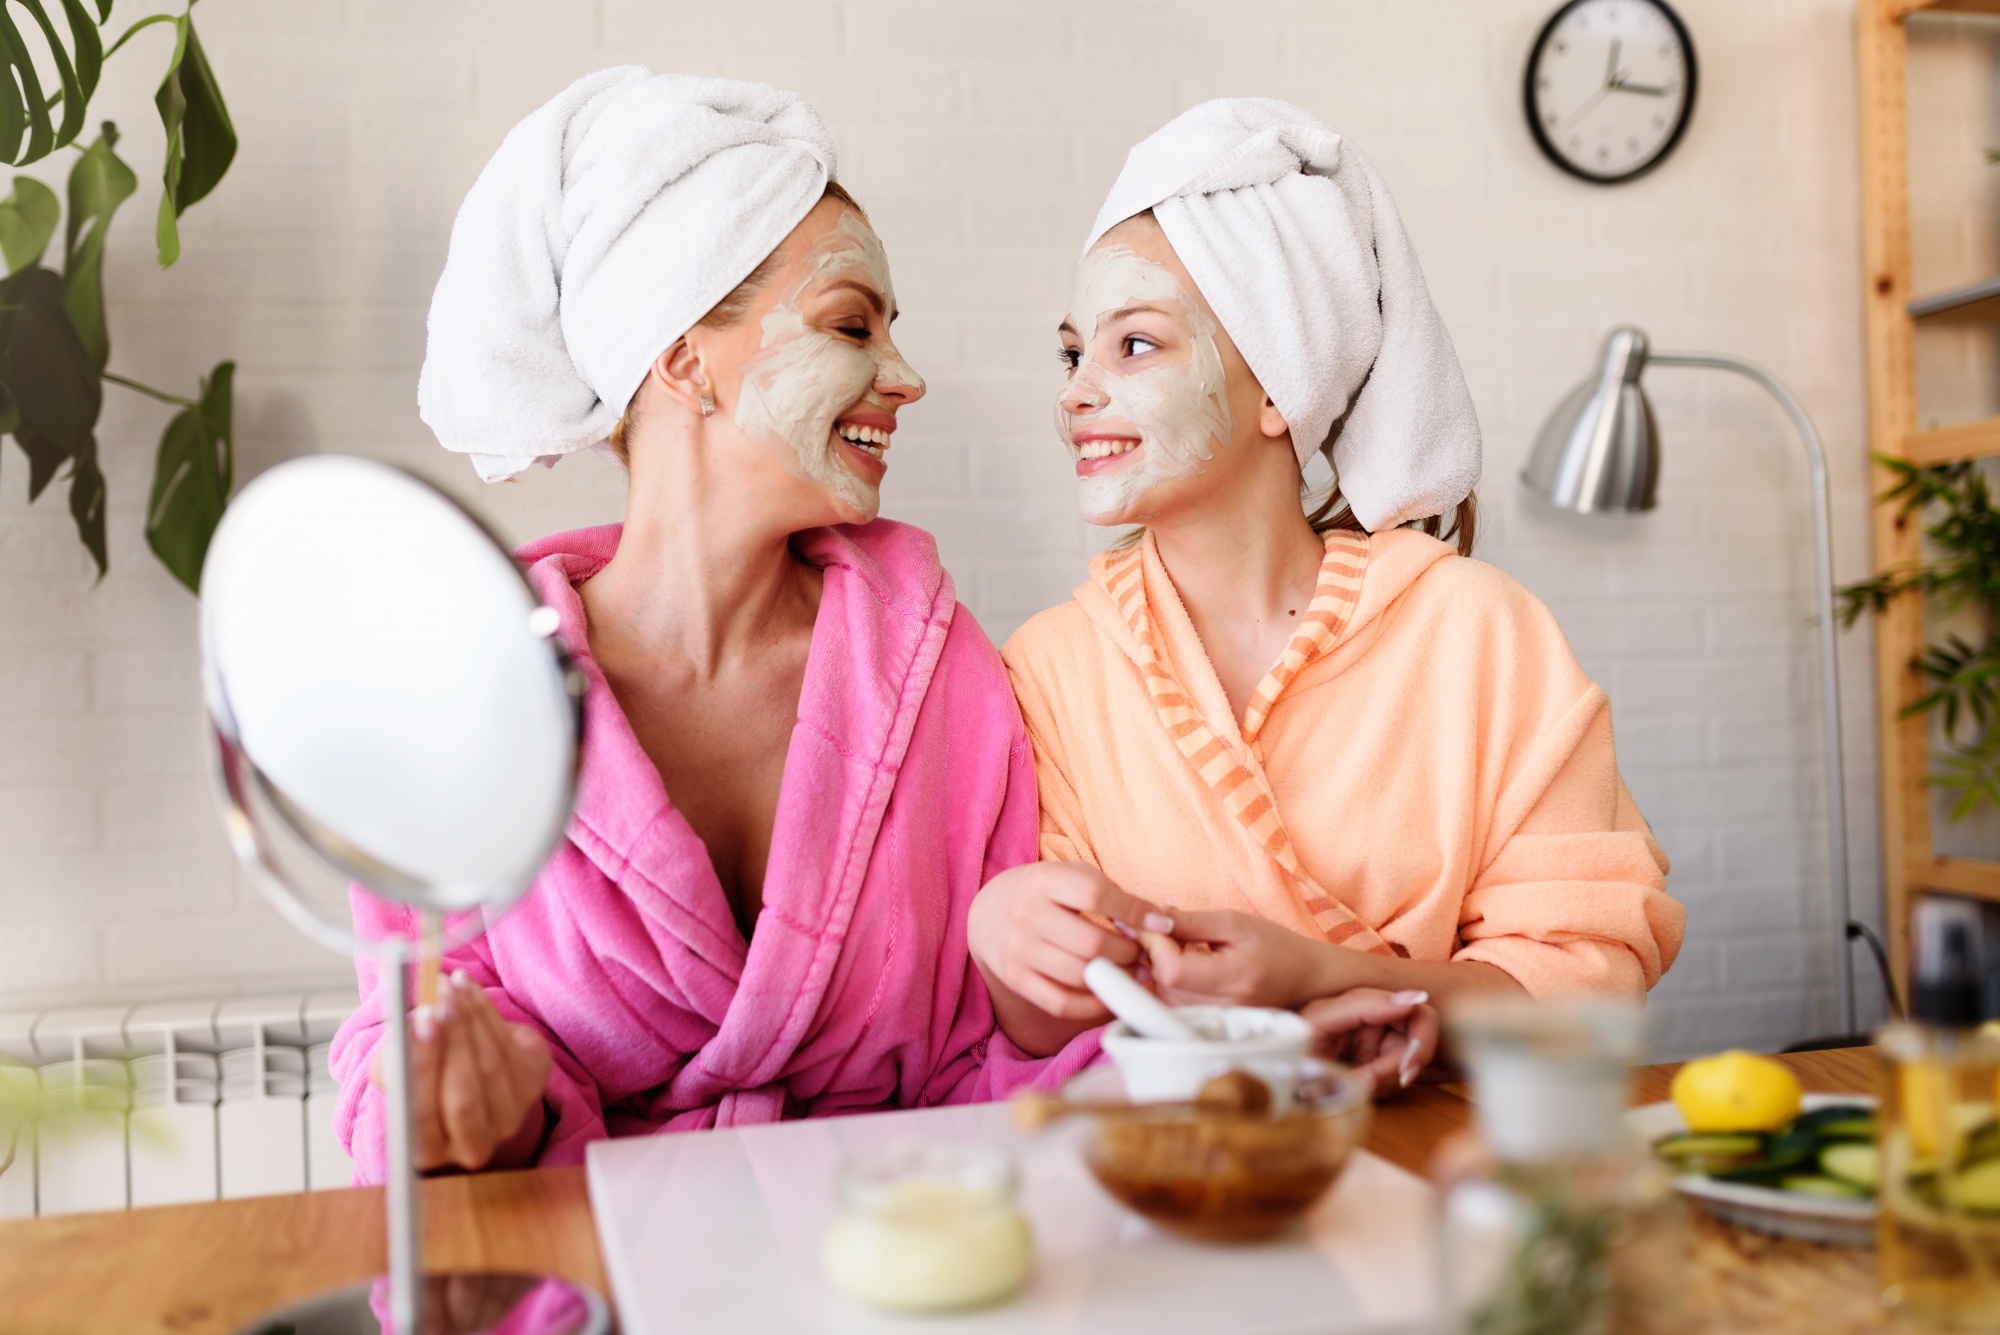 Mother daughter spa day, mom and daughter in bathrobes and towels using natural cosmetics and having fun at home